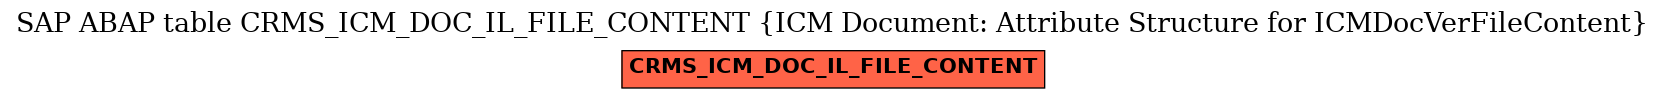 E-R Diagram for table CRMS_ICM_DOC_IL_FILE_CONTENT (ICM Document: Attribute Structure for ICMDocVerFileContent)